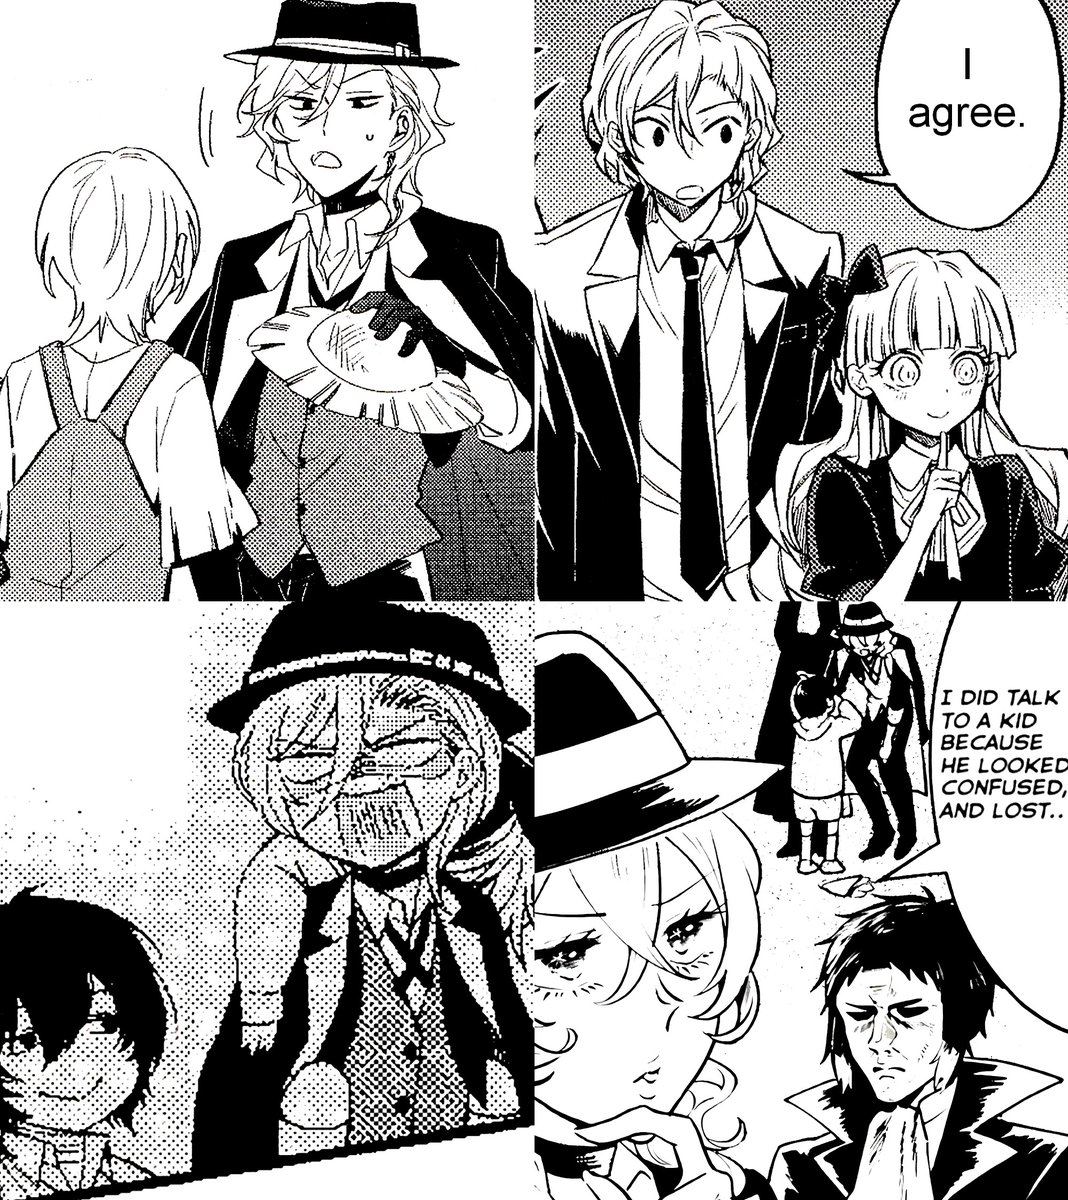 Happy mother's day to Chuuya 🎀